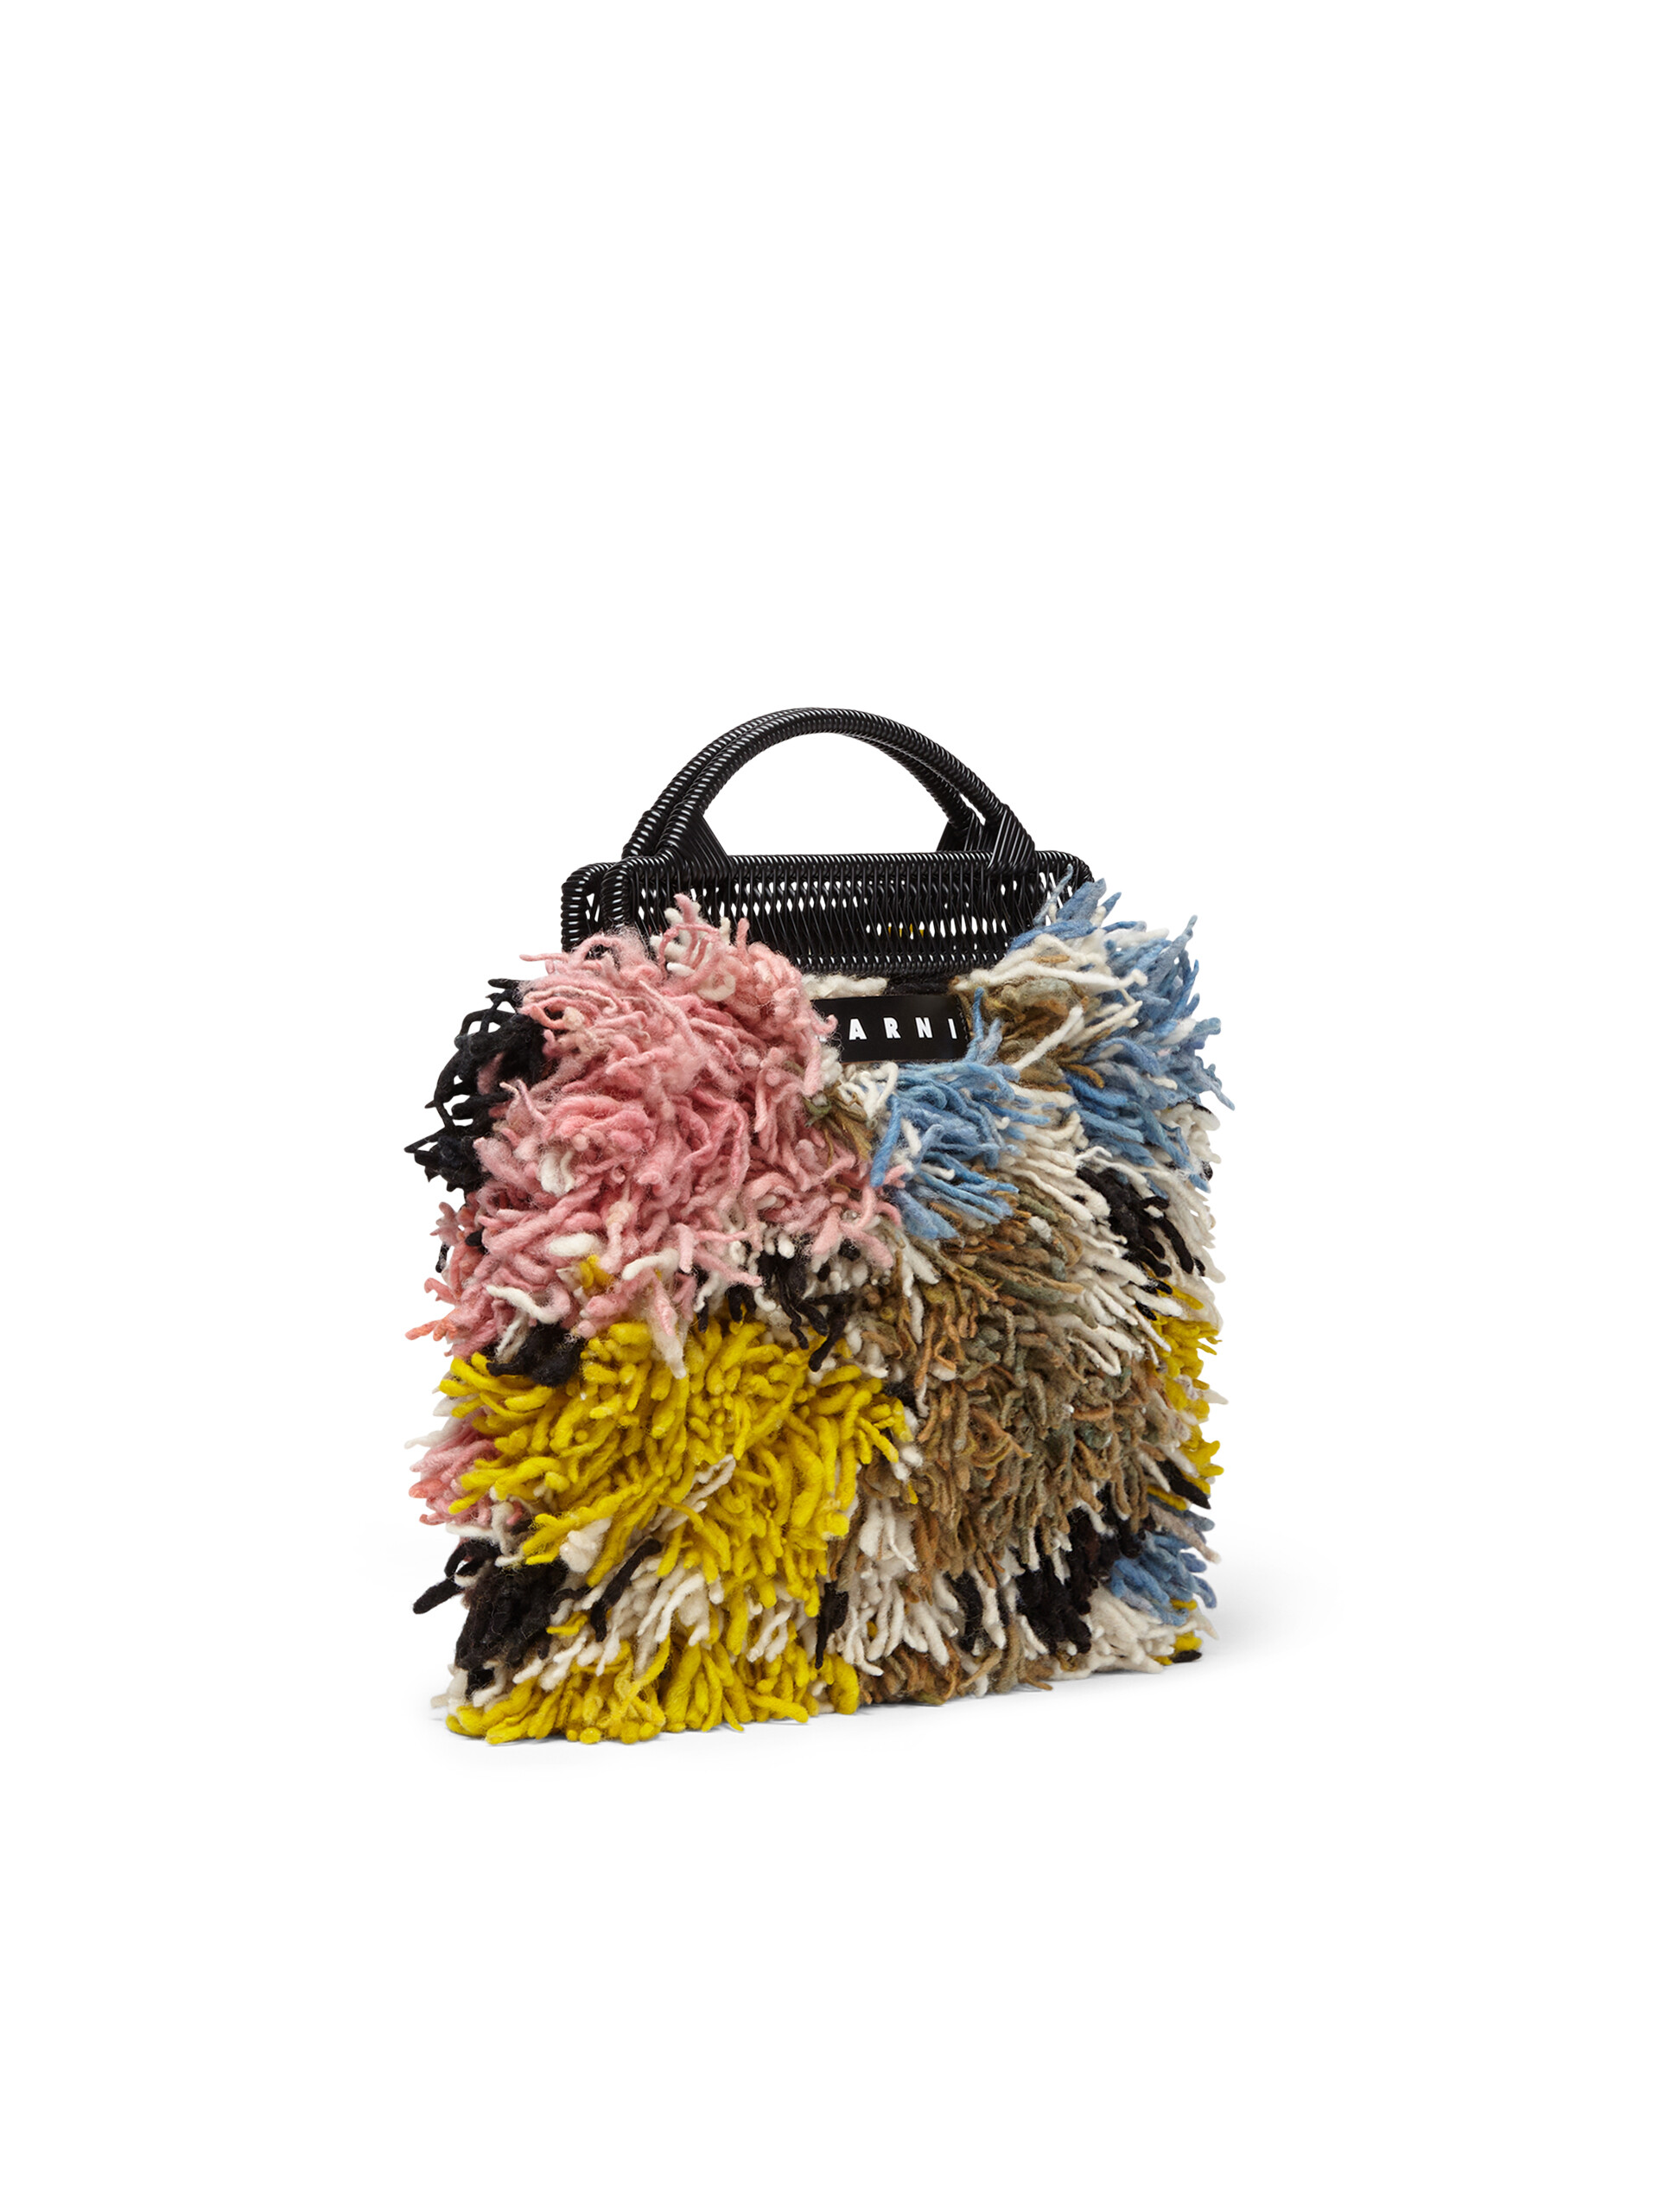 MARNI MARKET multicoloured frame bag in yellow pink and pale blue long wool - Furniture - Image 2